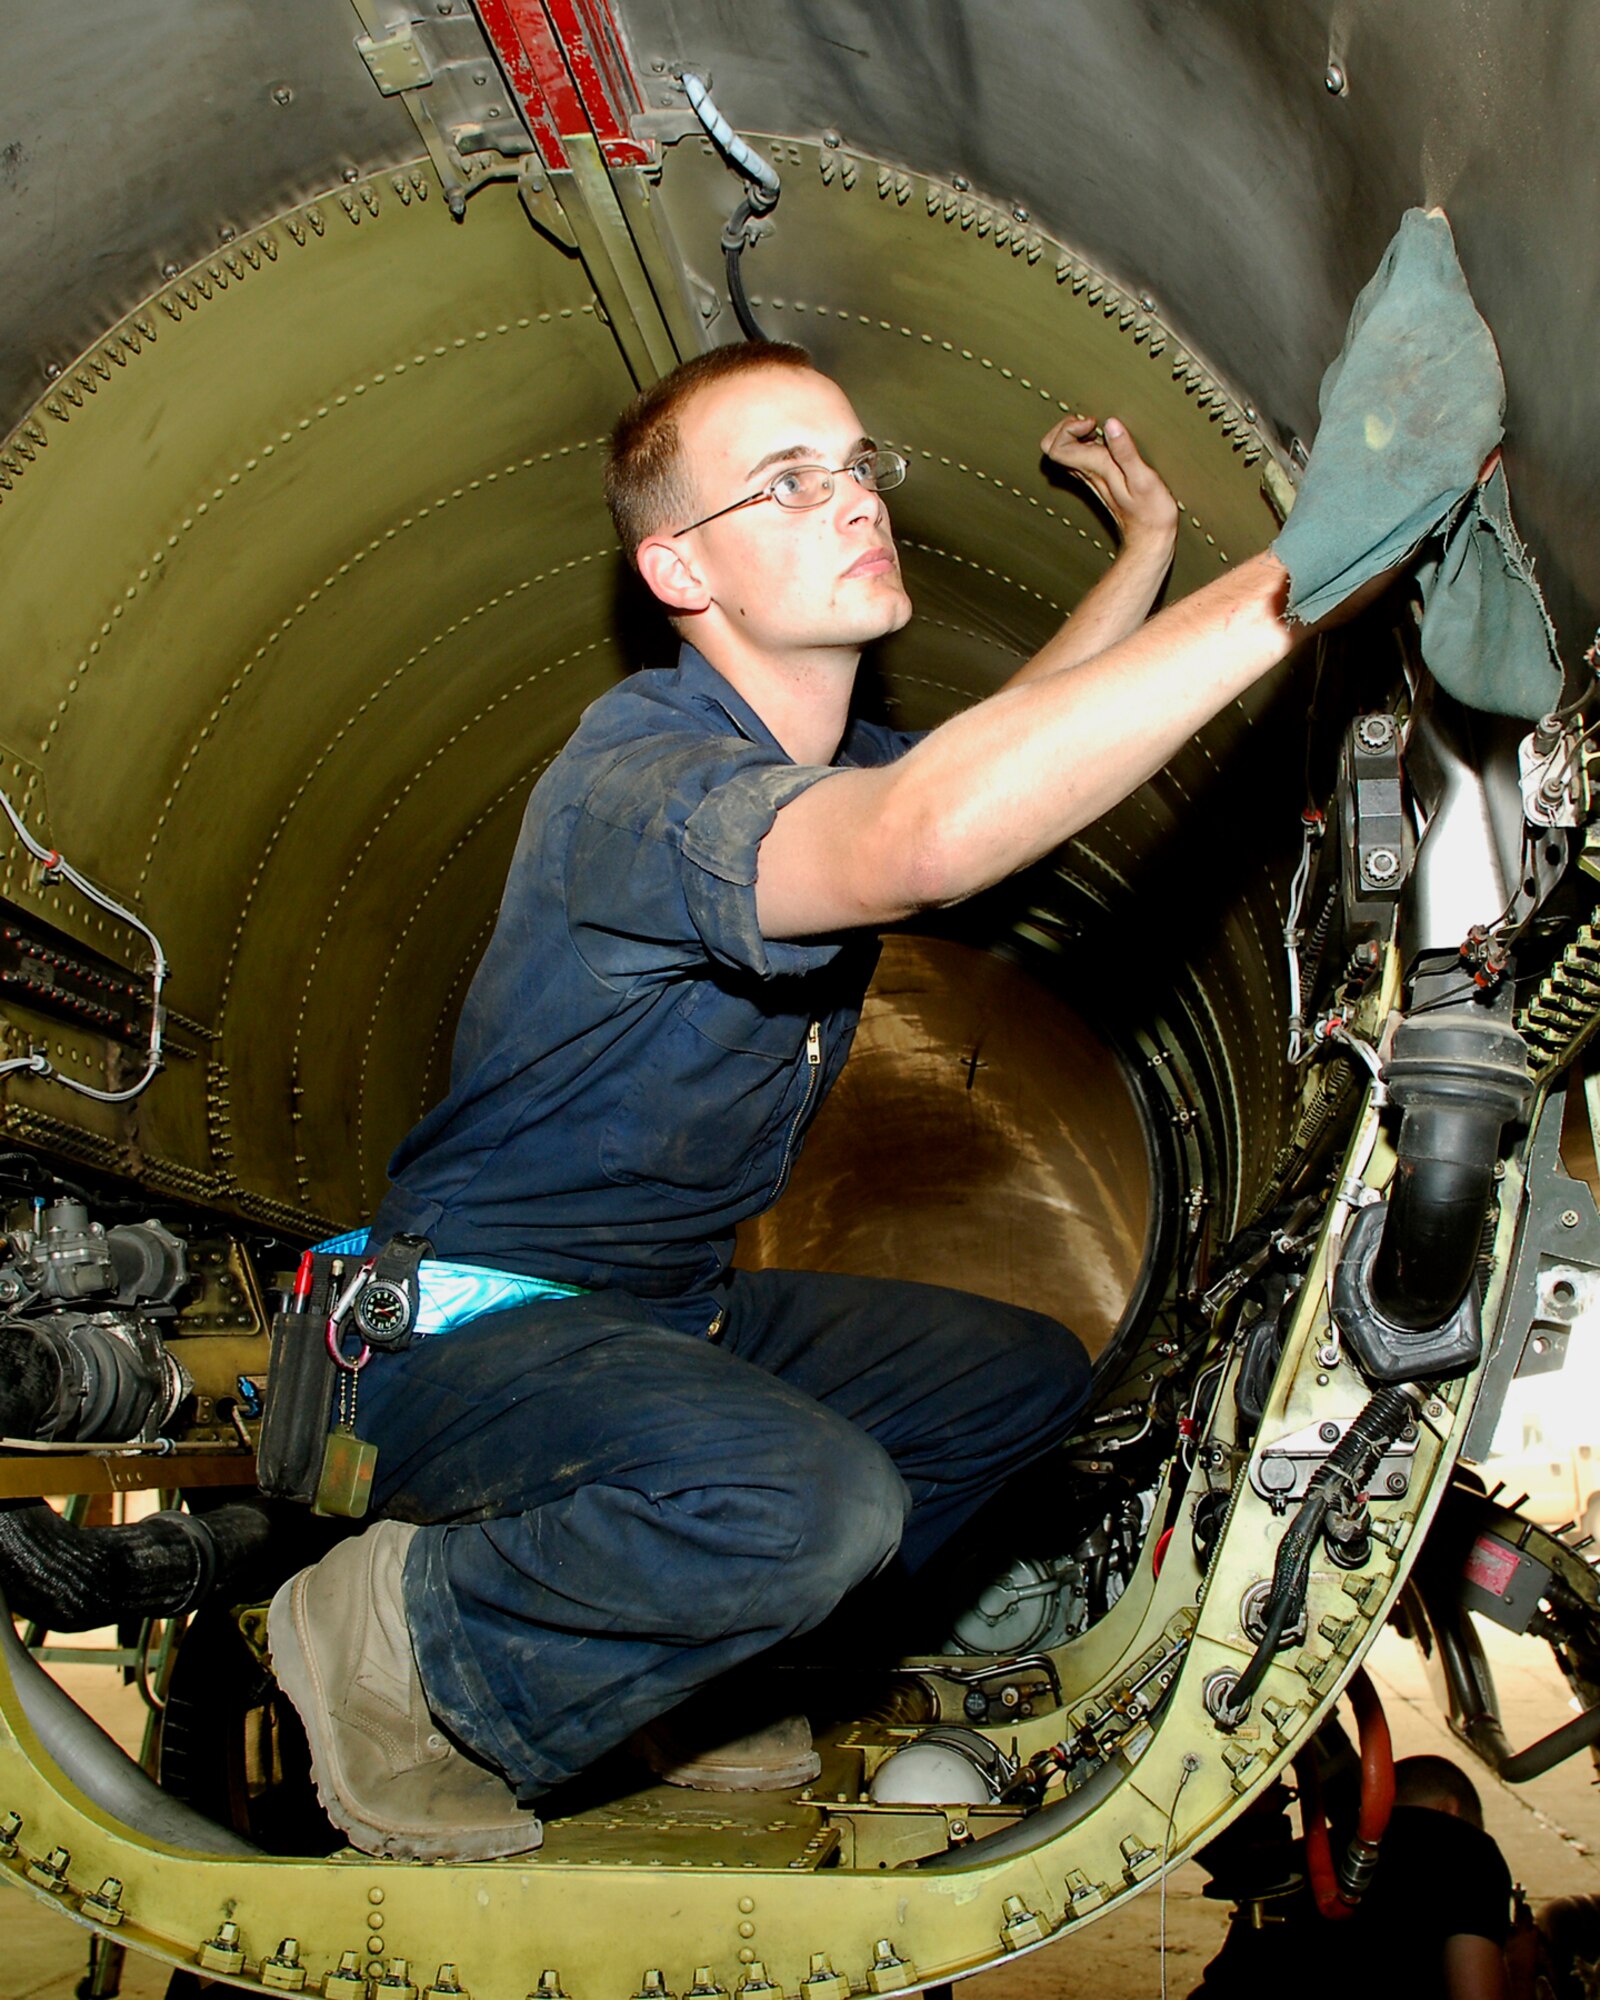 BALAD AIR BASE, Iraq -- Airman 1st Class Joseph Miller, 332nd Aircraft Maintenance Squadron F-16 Fighting Falcon crew chief, wipes down the inside of an F-16 Fighting Falcon here, April 19. Aircraft maintainers work around the clock performing scheduled maintenance and inspections on aircraft and making necessary repairs to keep the jets in top flying condition. Airman Miller is deployed from Spangdahlem Air Base, Germany. (U.S. Air Force photo /Staff Sgt. Mareshah Haynes)
